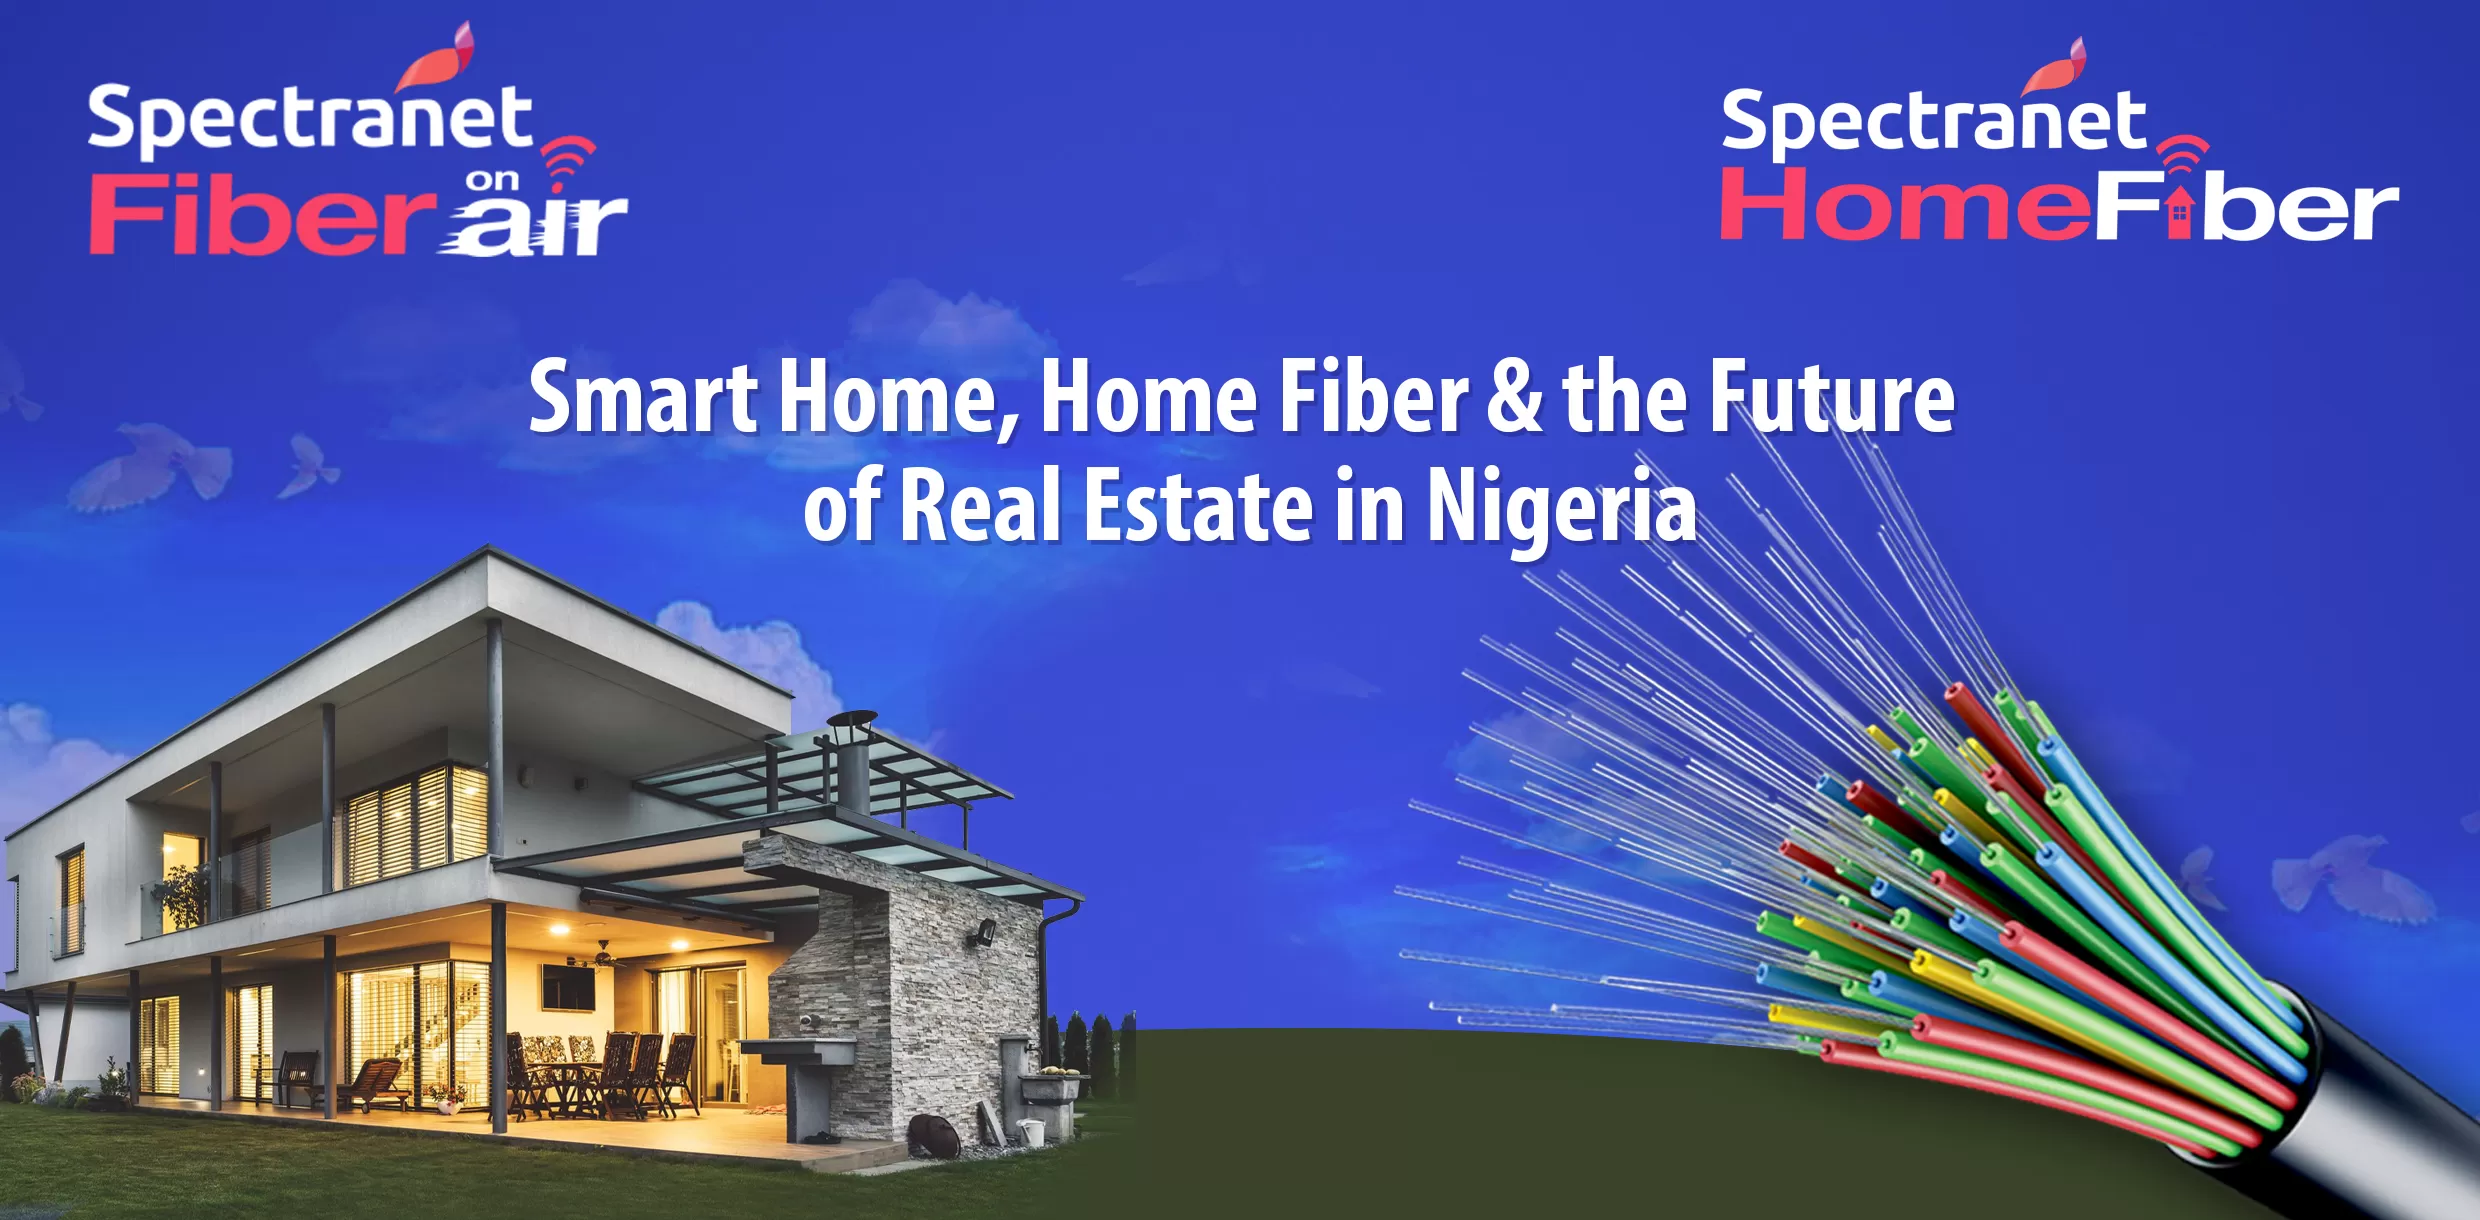 SMART HOMES, HOME FIBER AND THE FUTURE OF REAL ESTATE IN NIGERIA